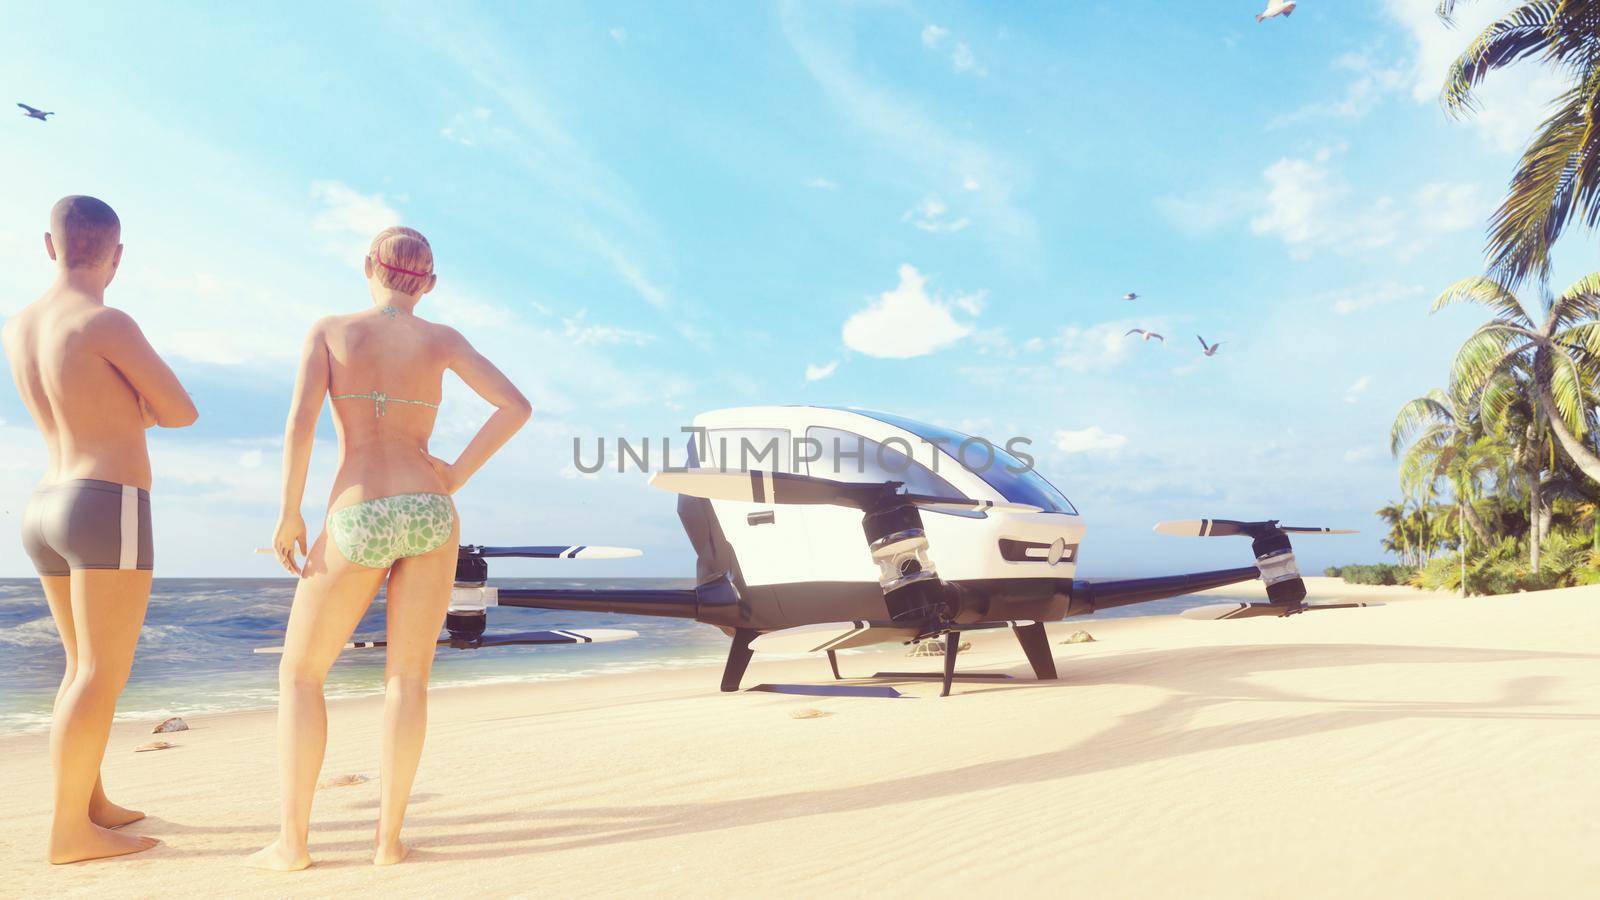 Unmanned passenger air taxi on the beach of a tropical island. The concept of the future driverless taxi. 3D Rendering by designprojects